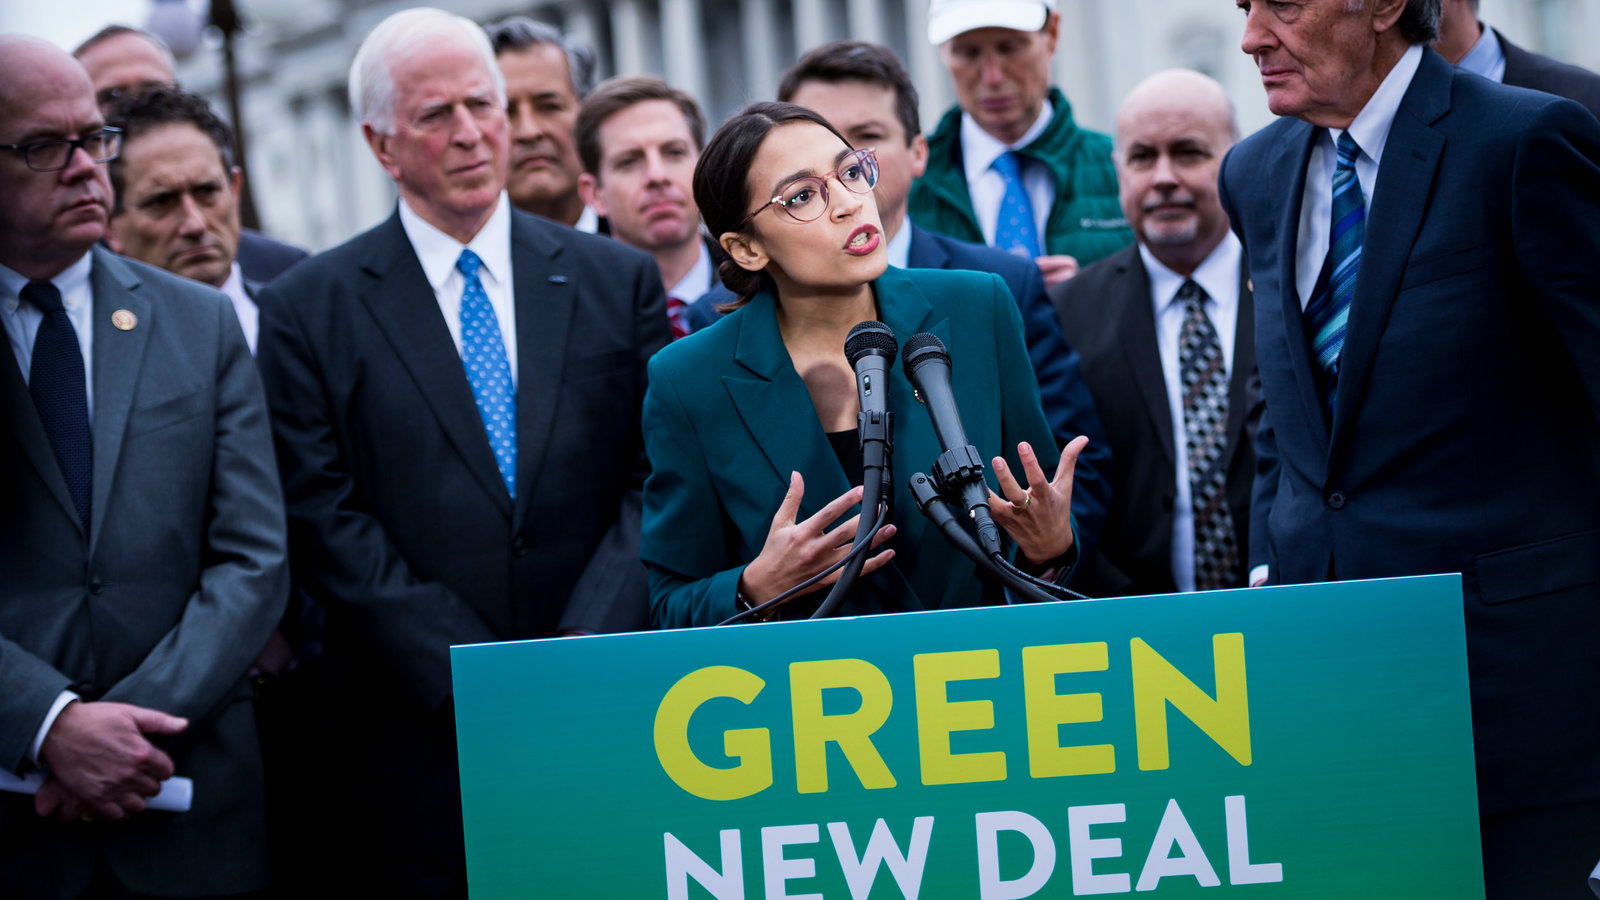 Green New Deal AOC Taxpayers Innovation Inhibition